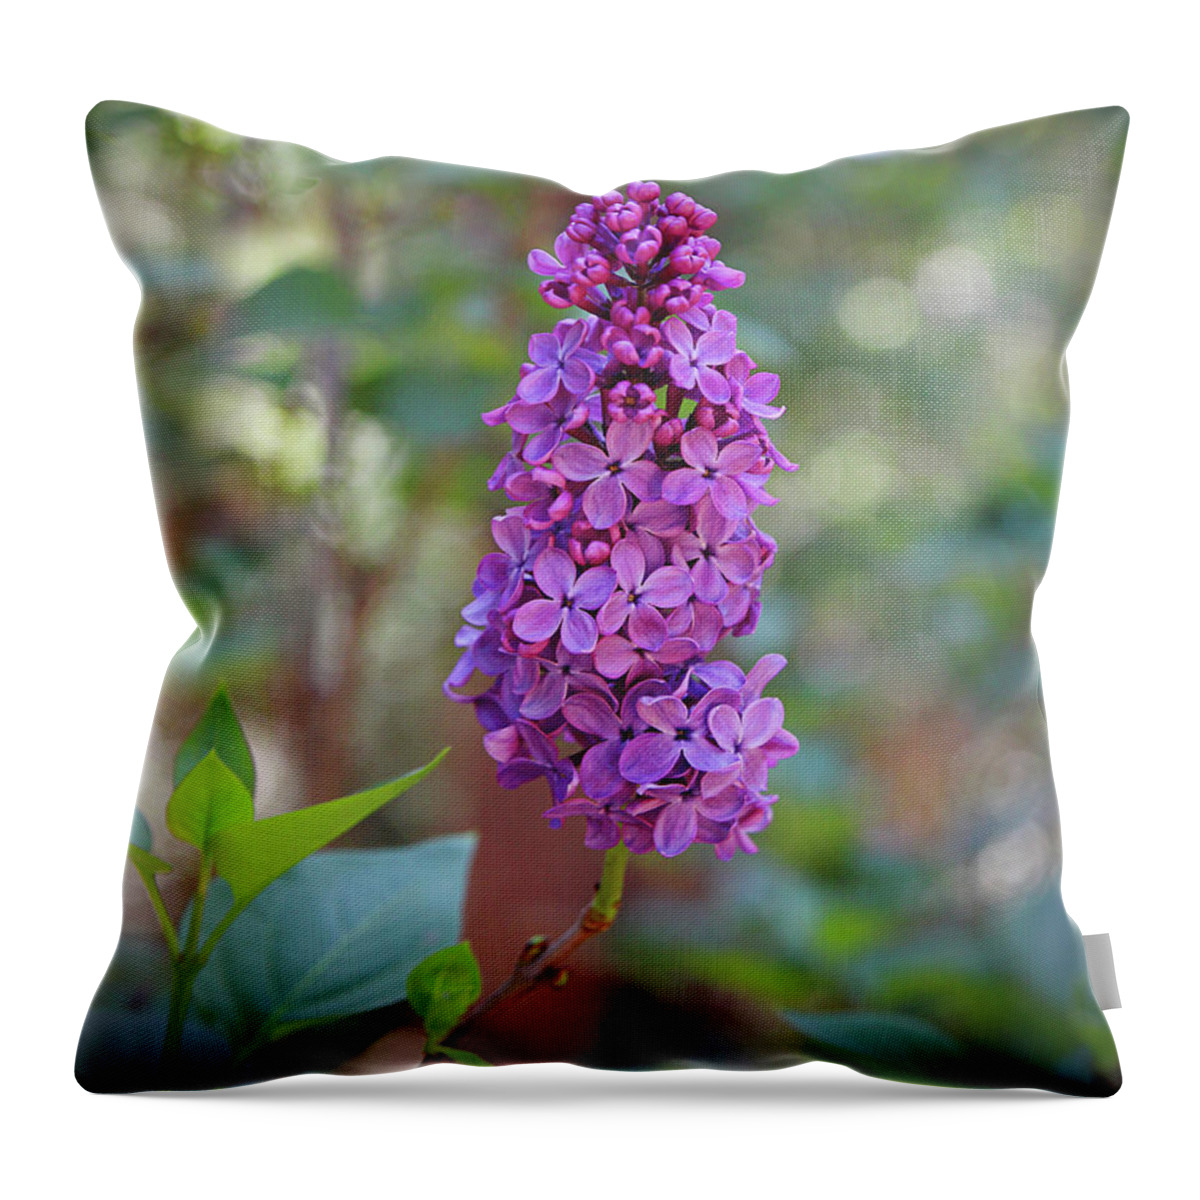 Lilac Throw Pillow featuring the photograph Lilac Bloom- Photography by Linda Woods by Linda Woods